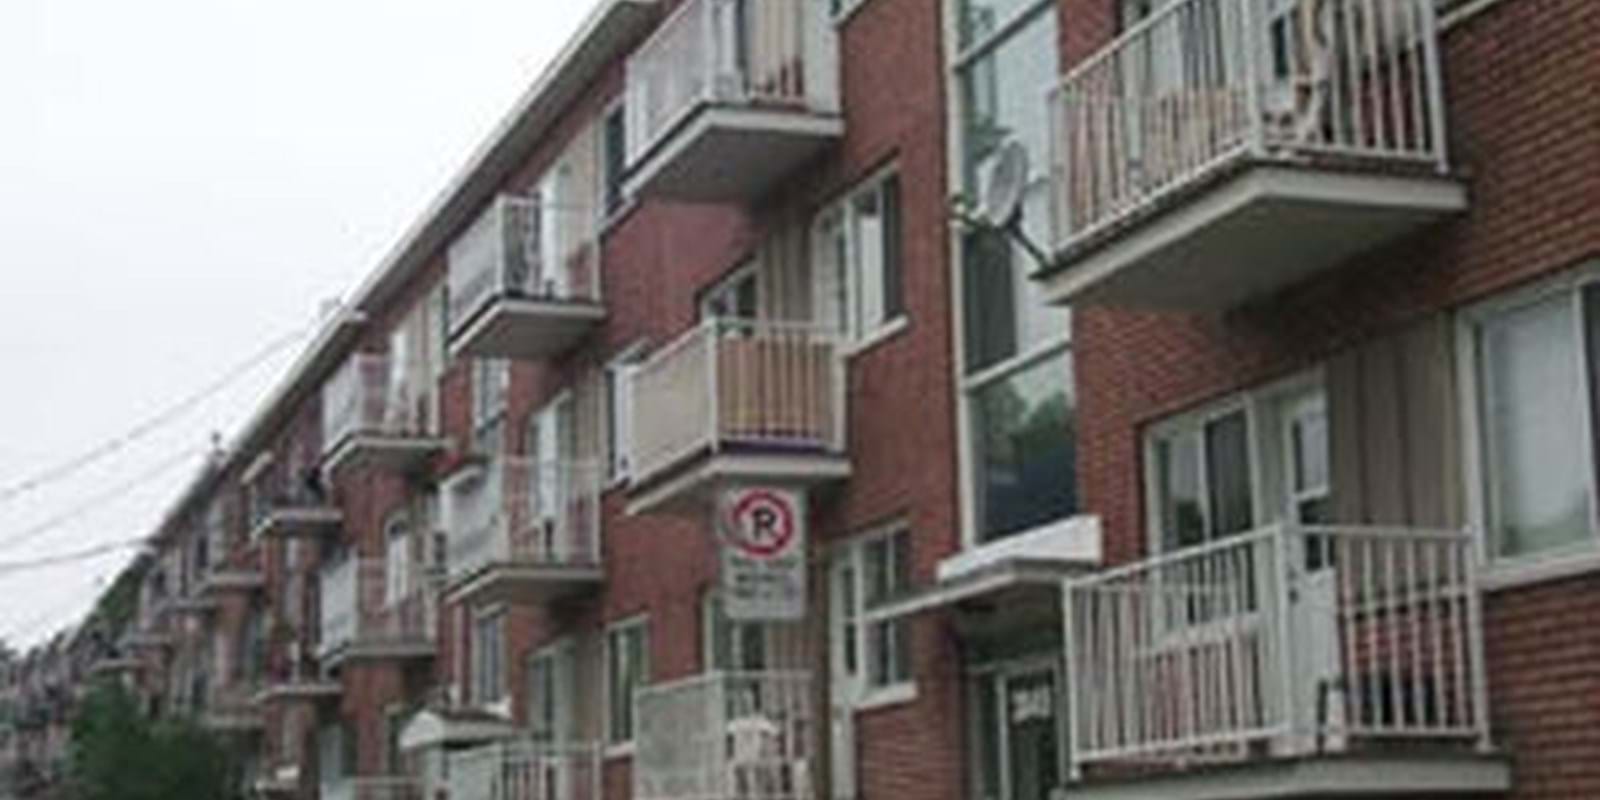 Seized three residences for elderly people located in Quebec